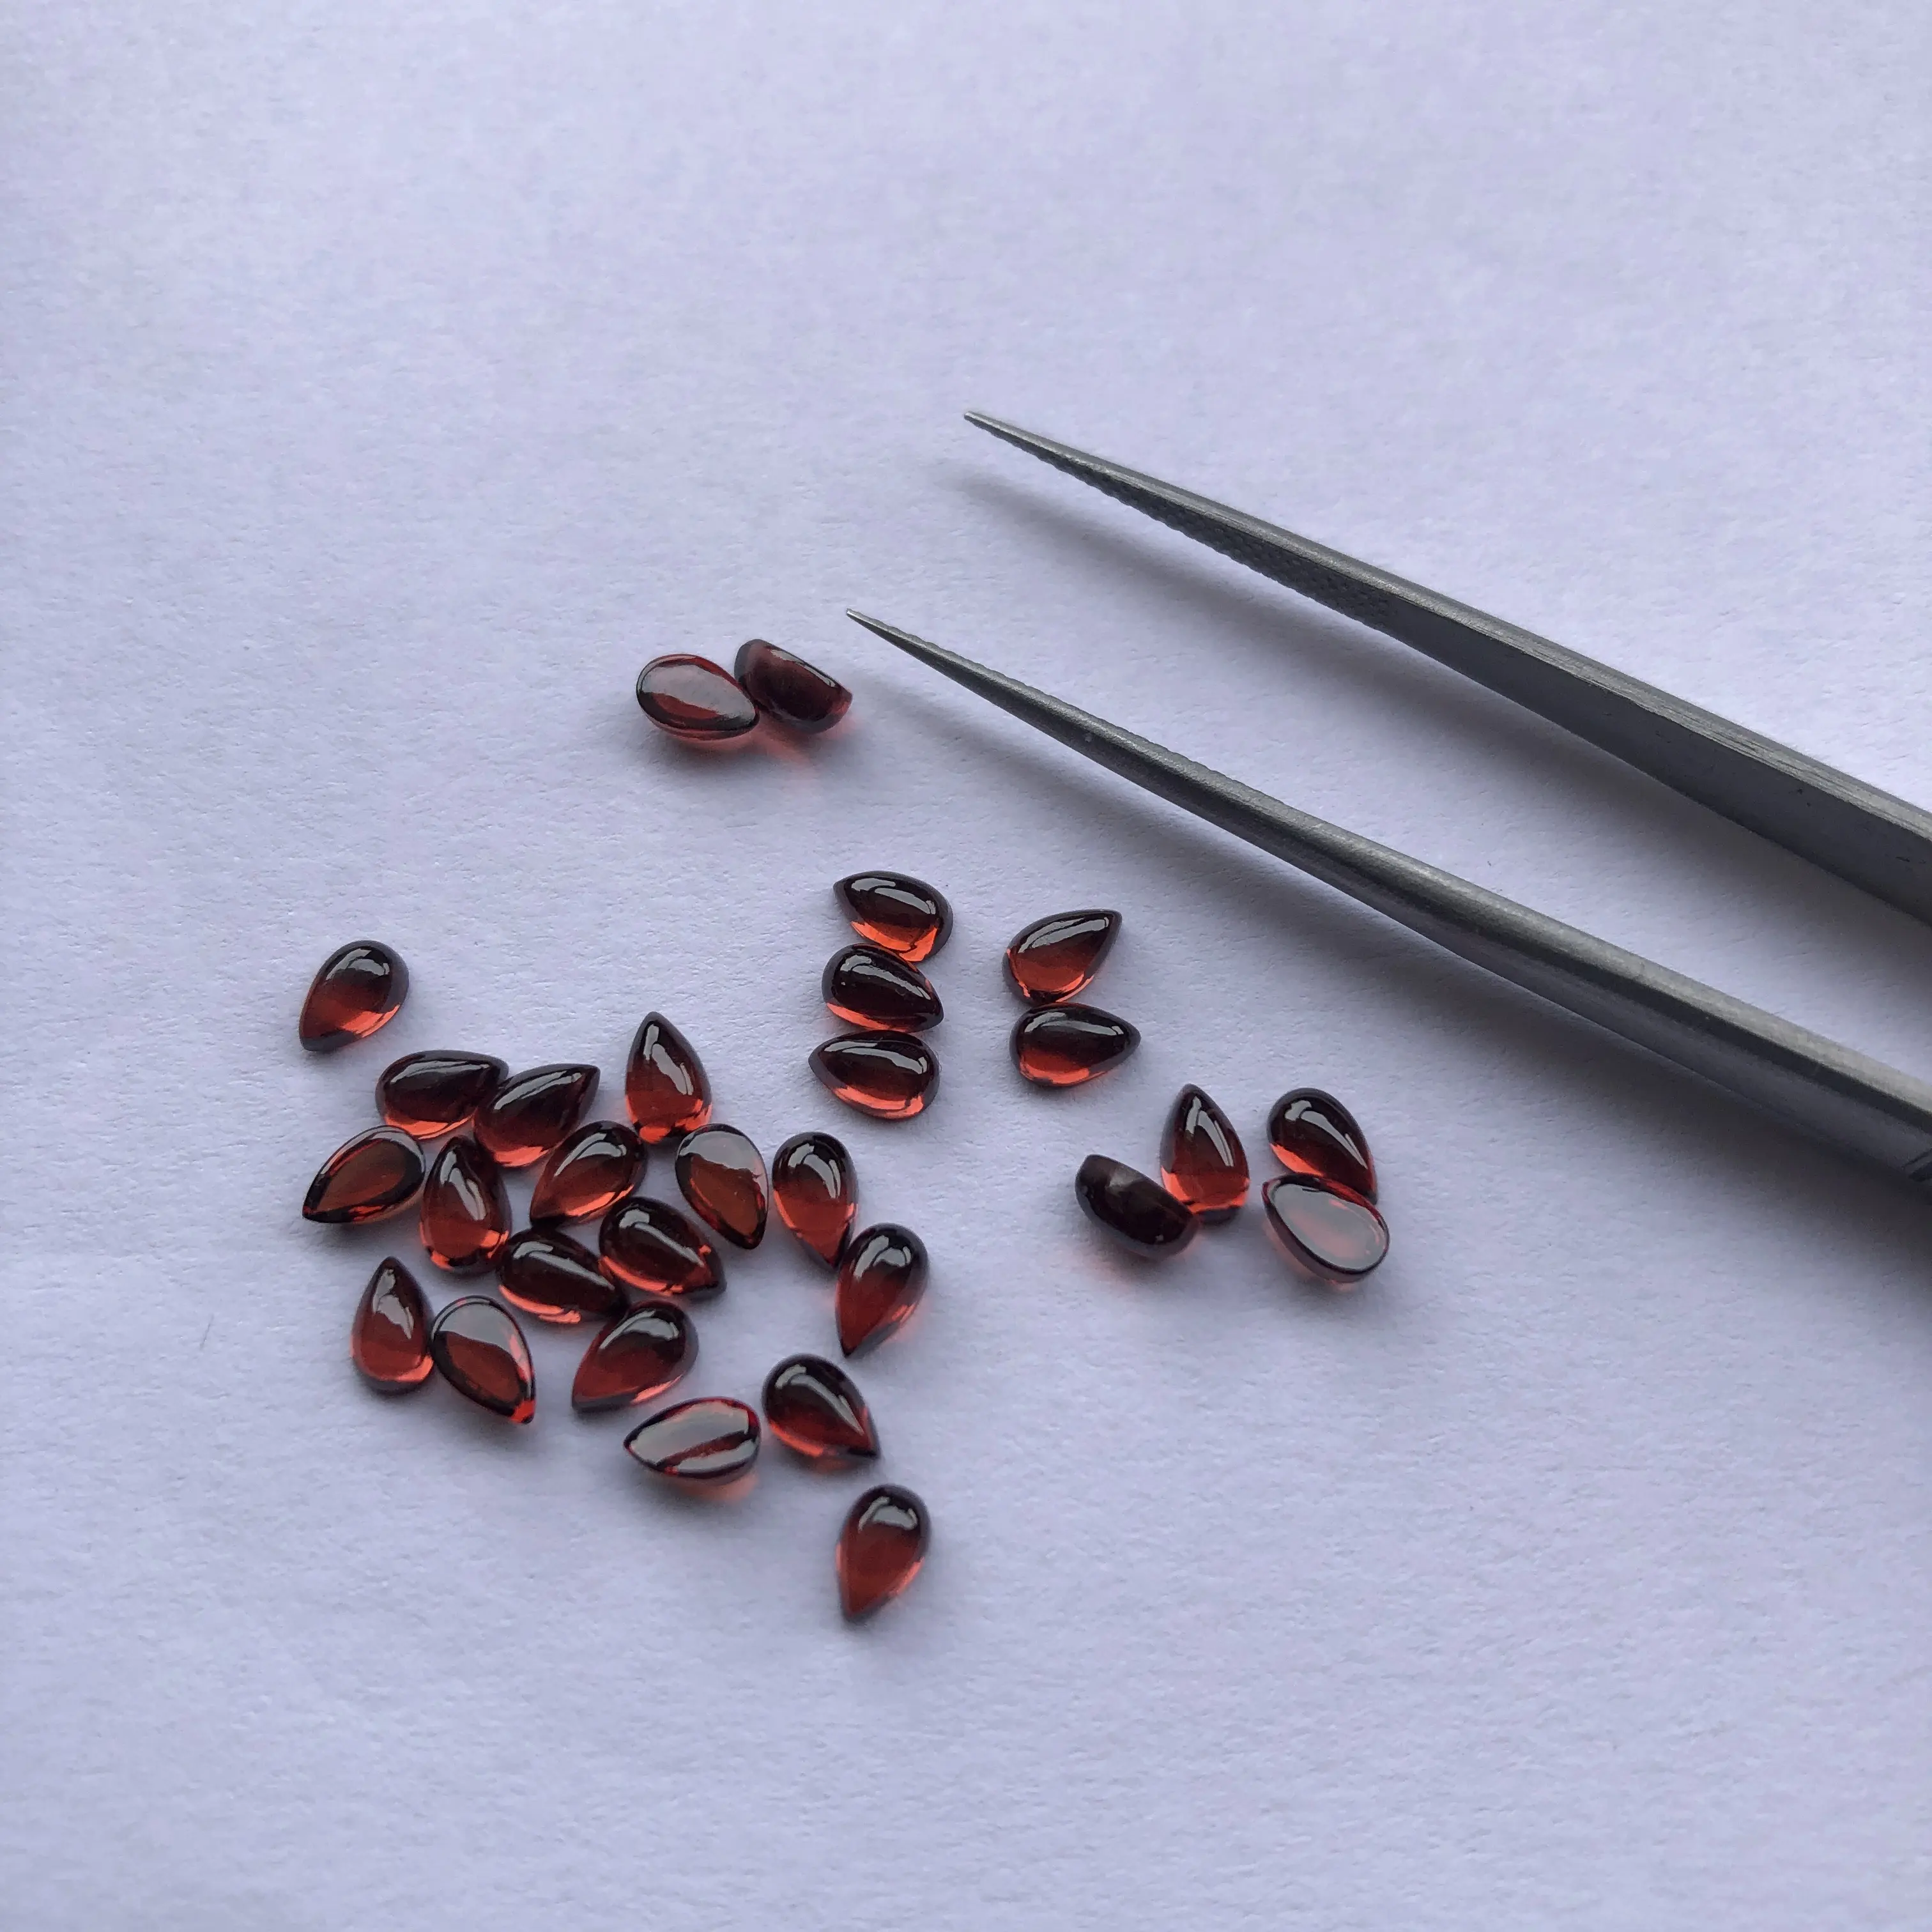 6x4mm Natural Red Garnet Smooth Pear Wholesale Loose Cabochon Lot Stones for Jewelry Setting from Manufacturer